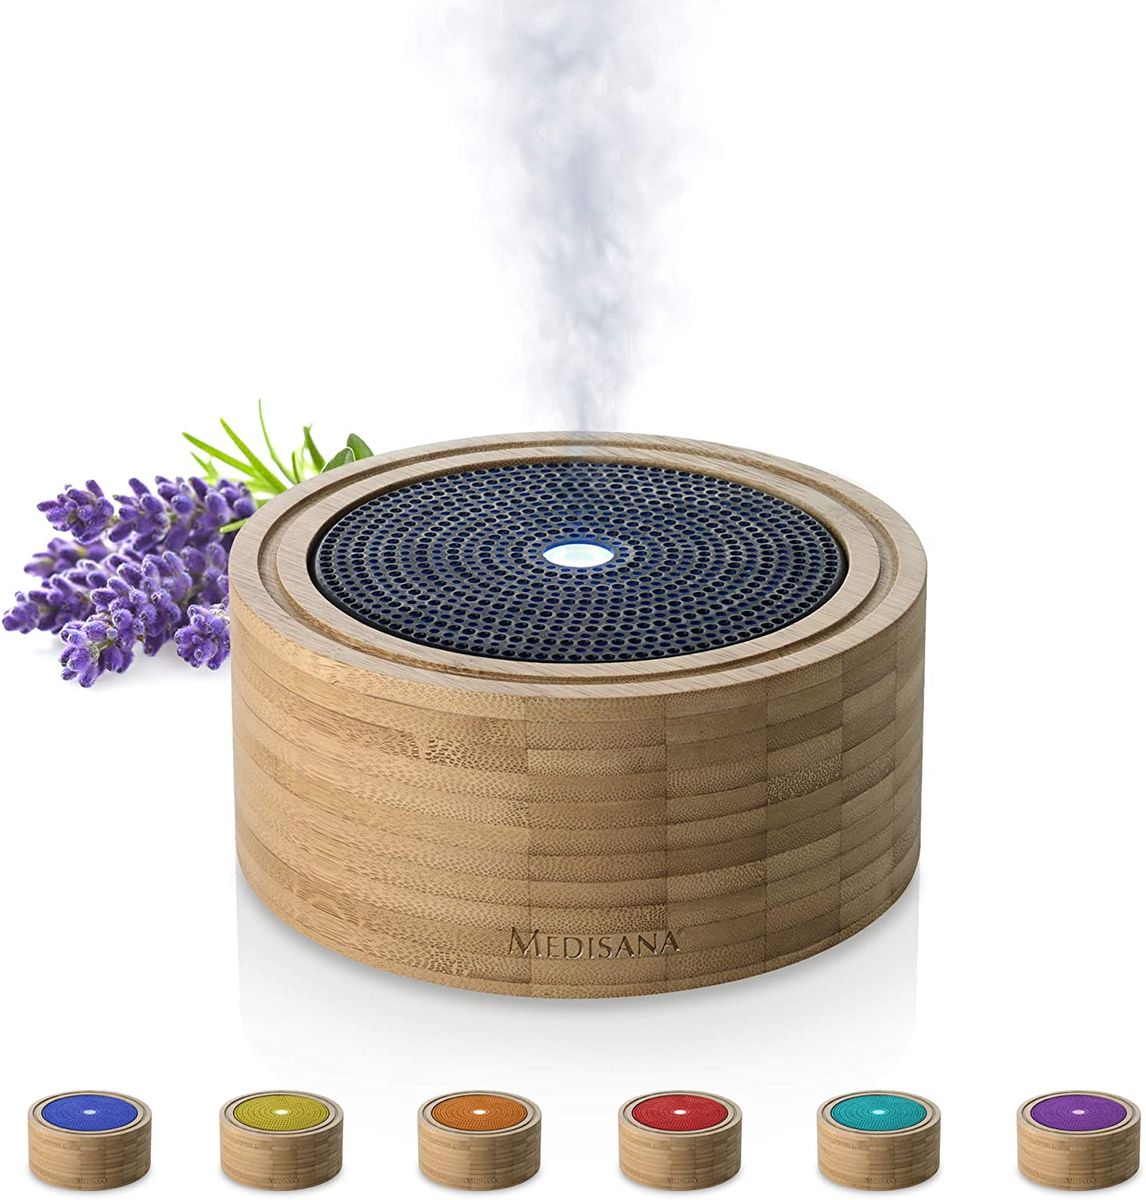 Medisana AD 625 aroma diffuser made of bamboo, nebulizer made of wood with wellness light in 6 colors, for essential fragrance oils, fragrance lamp with timer, 100 ml